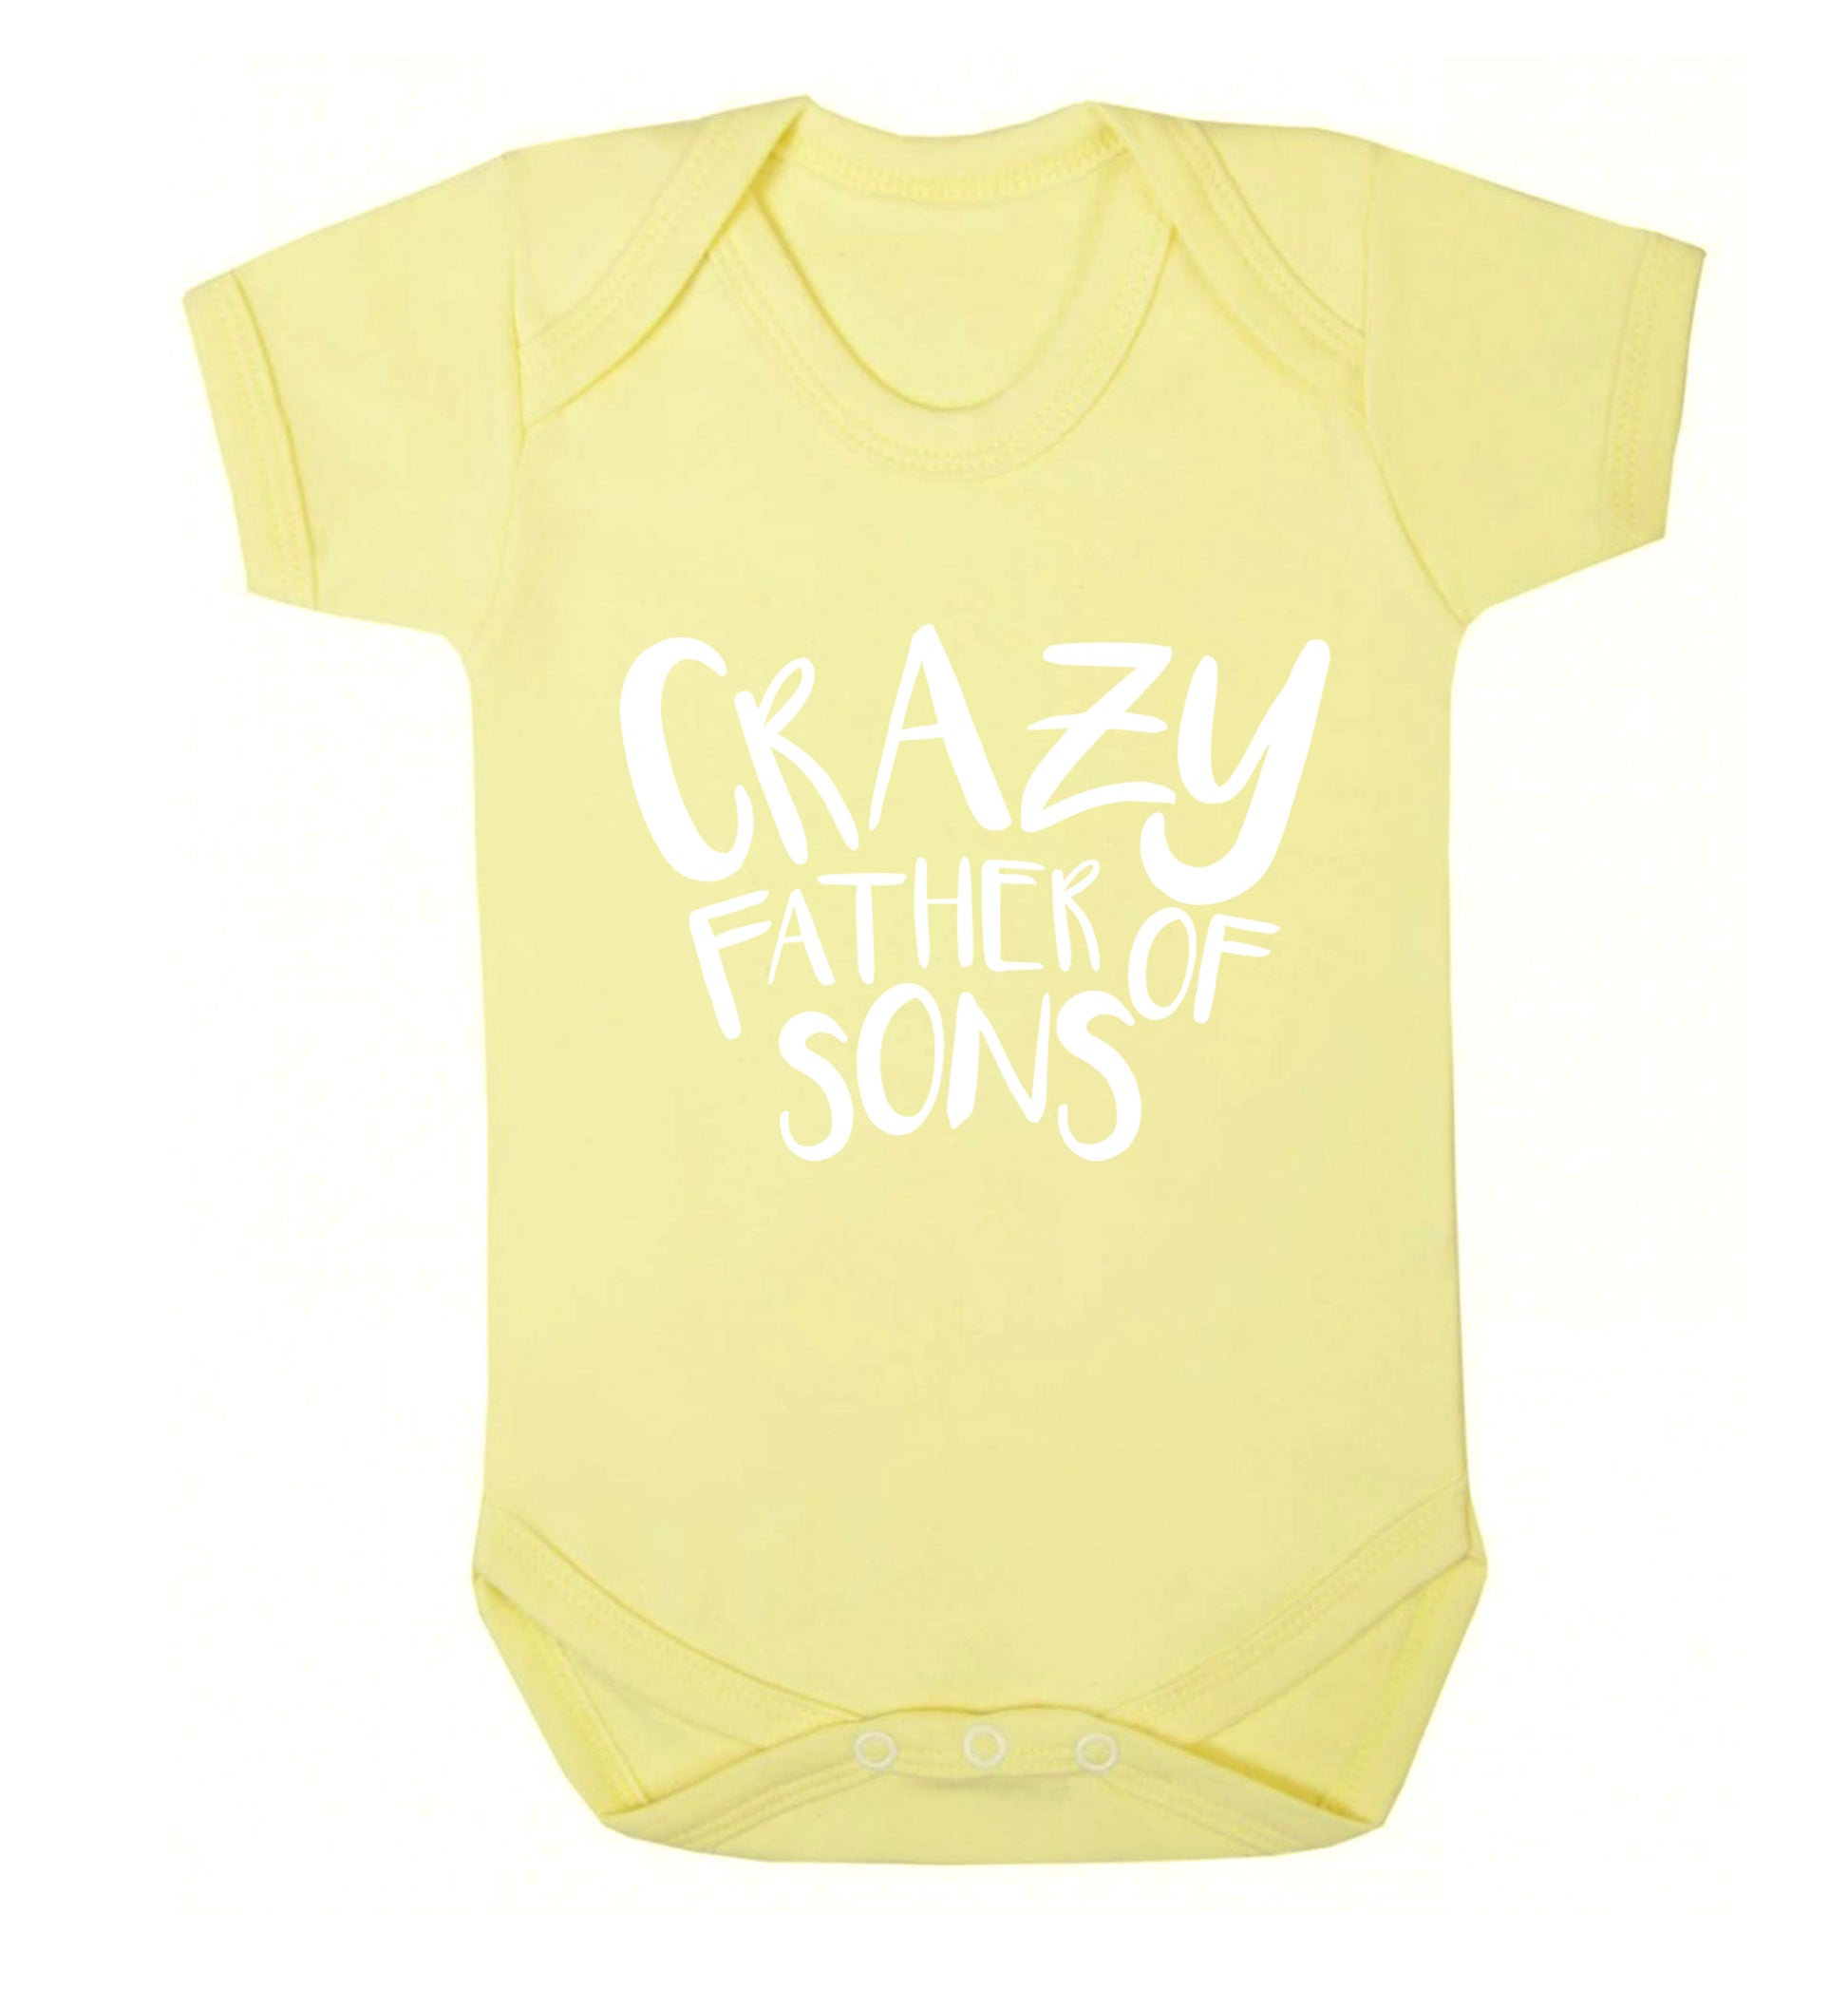 Crazy father of sons Baby Vest pale yellow 18-24 months